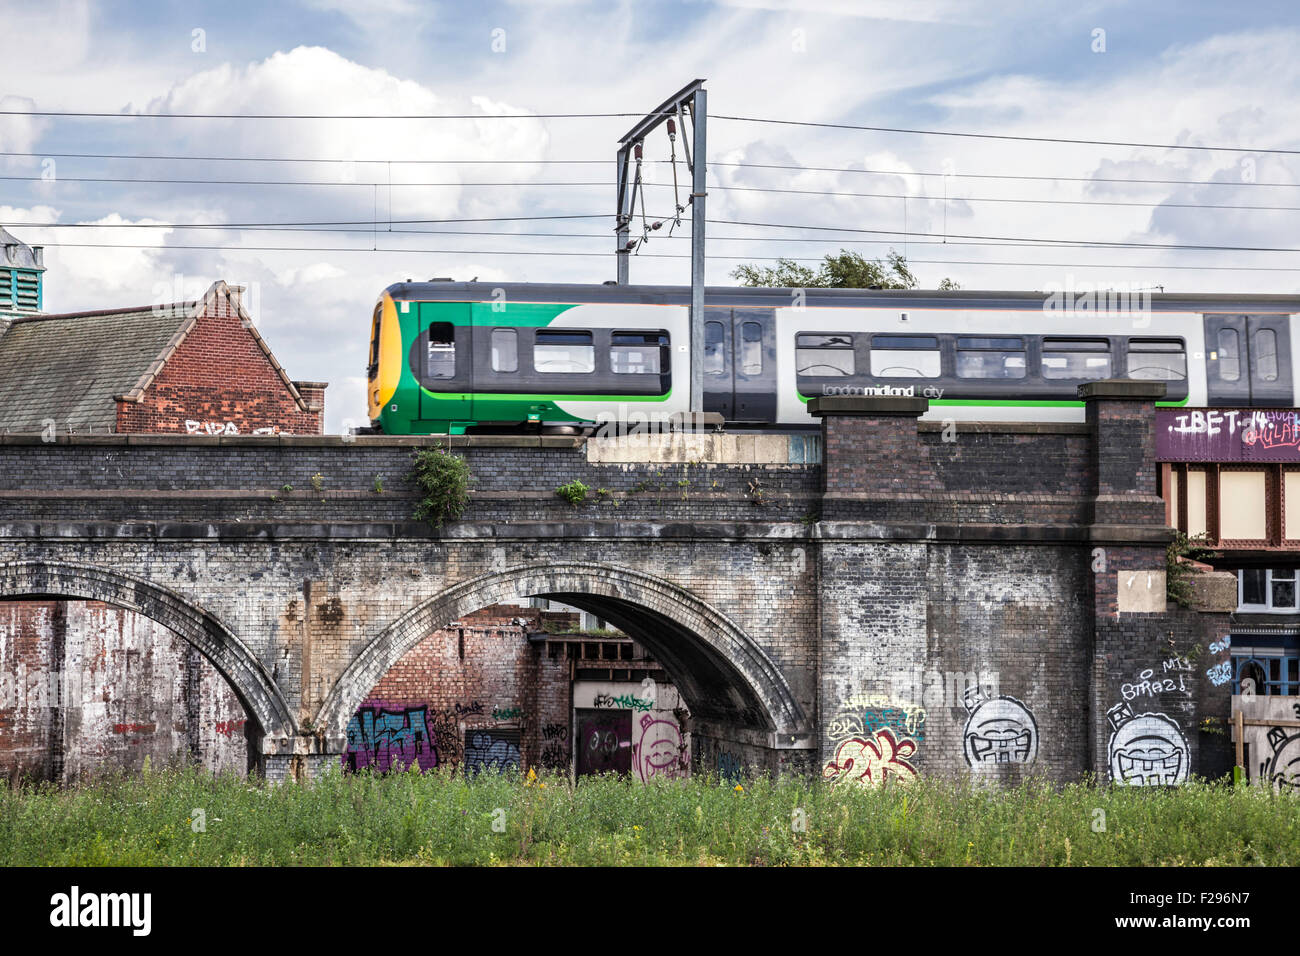 A London Midland train crossing the graffitied railway arches at Selly Oak, Birmingham, England, UK Stock Photo